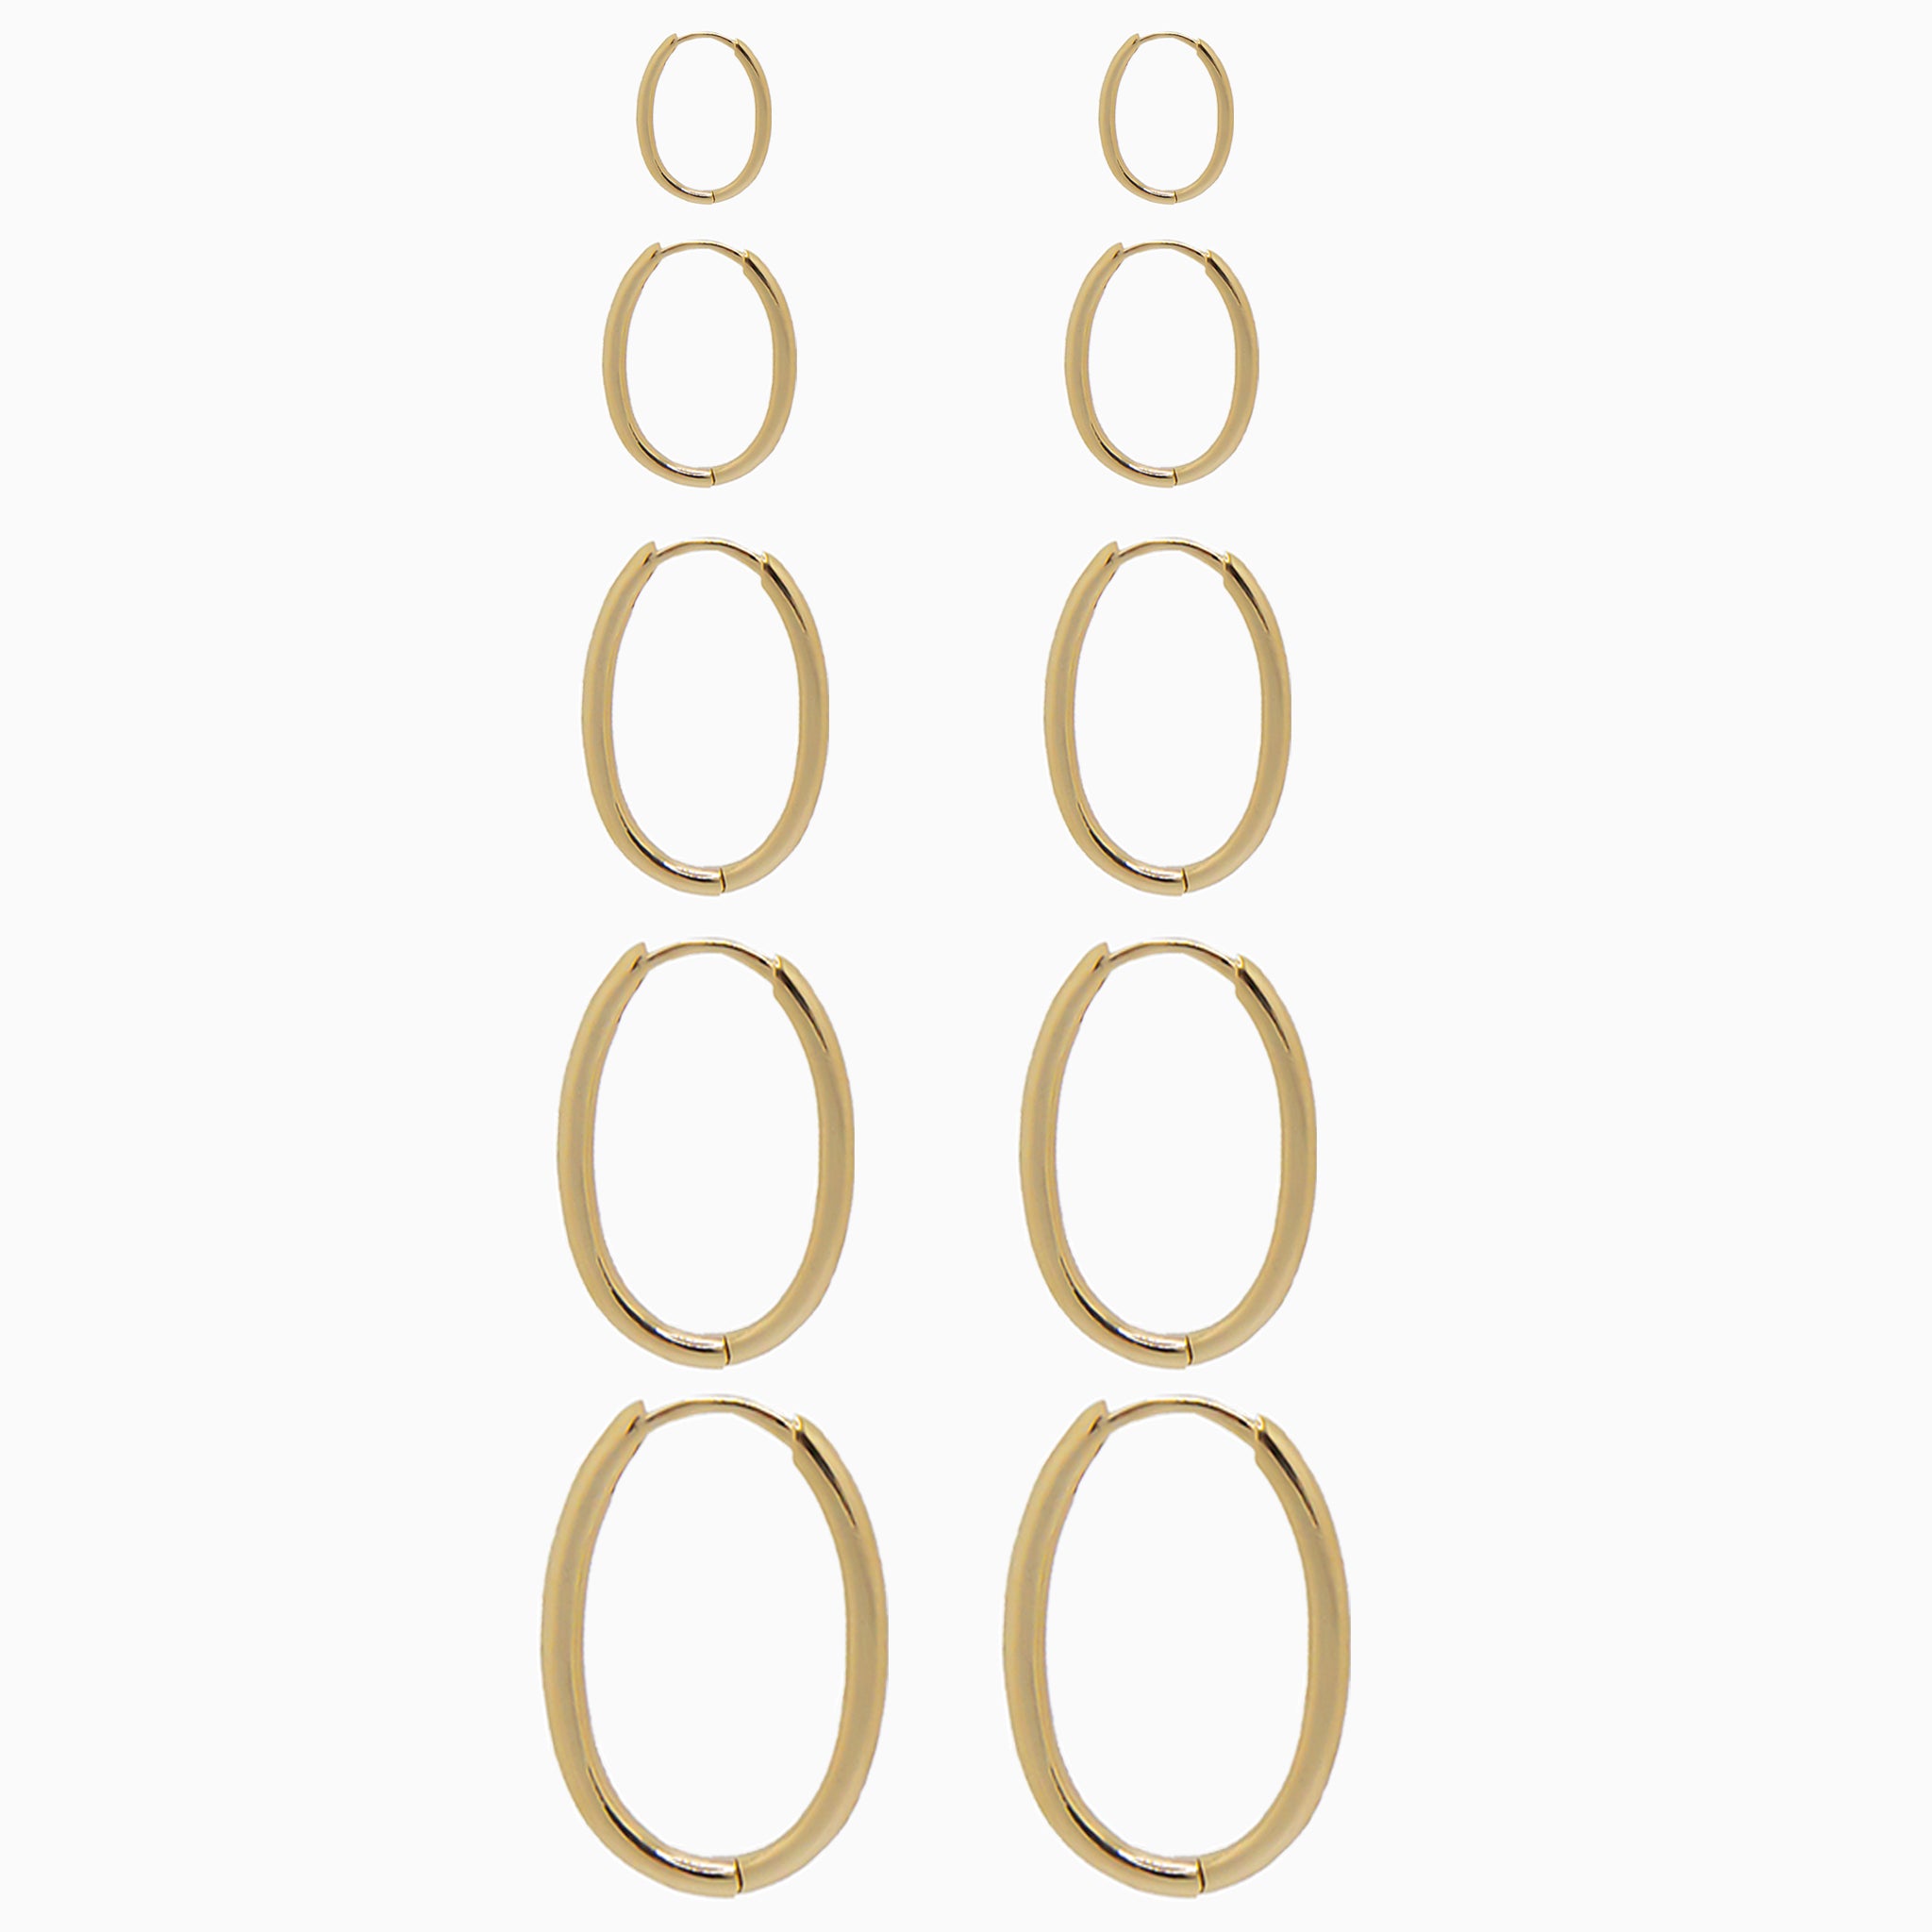 14k Yellow Gold Hinged Everyday Oval Hoop Earrings, Size Run View